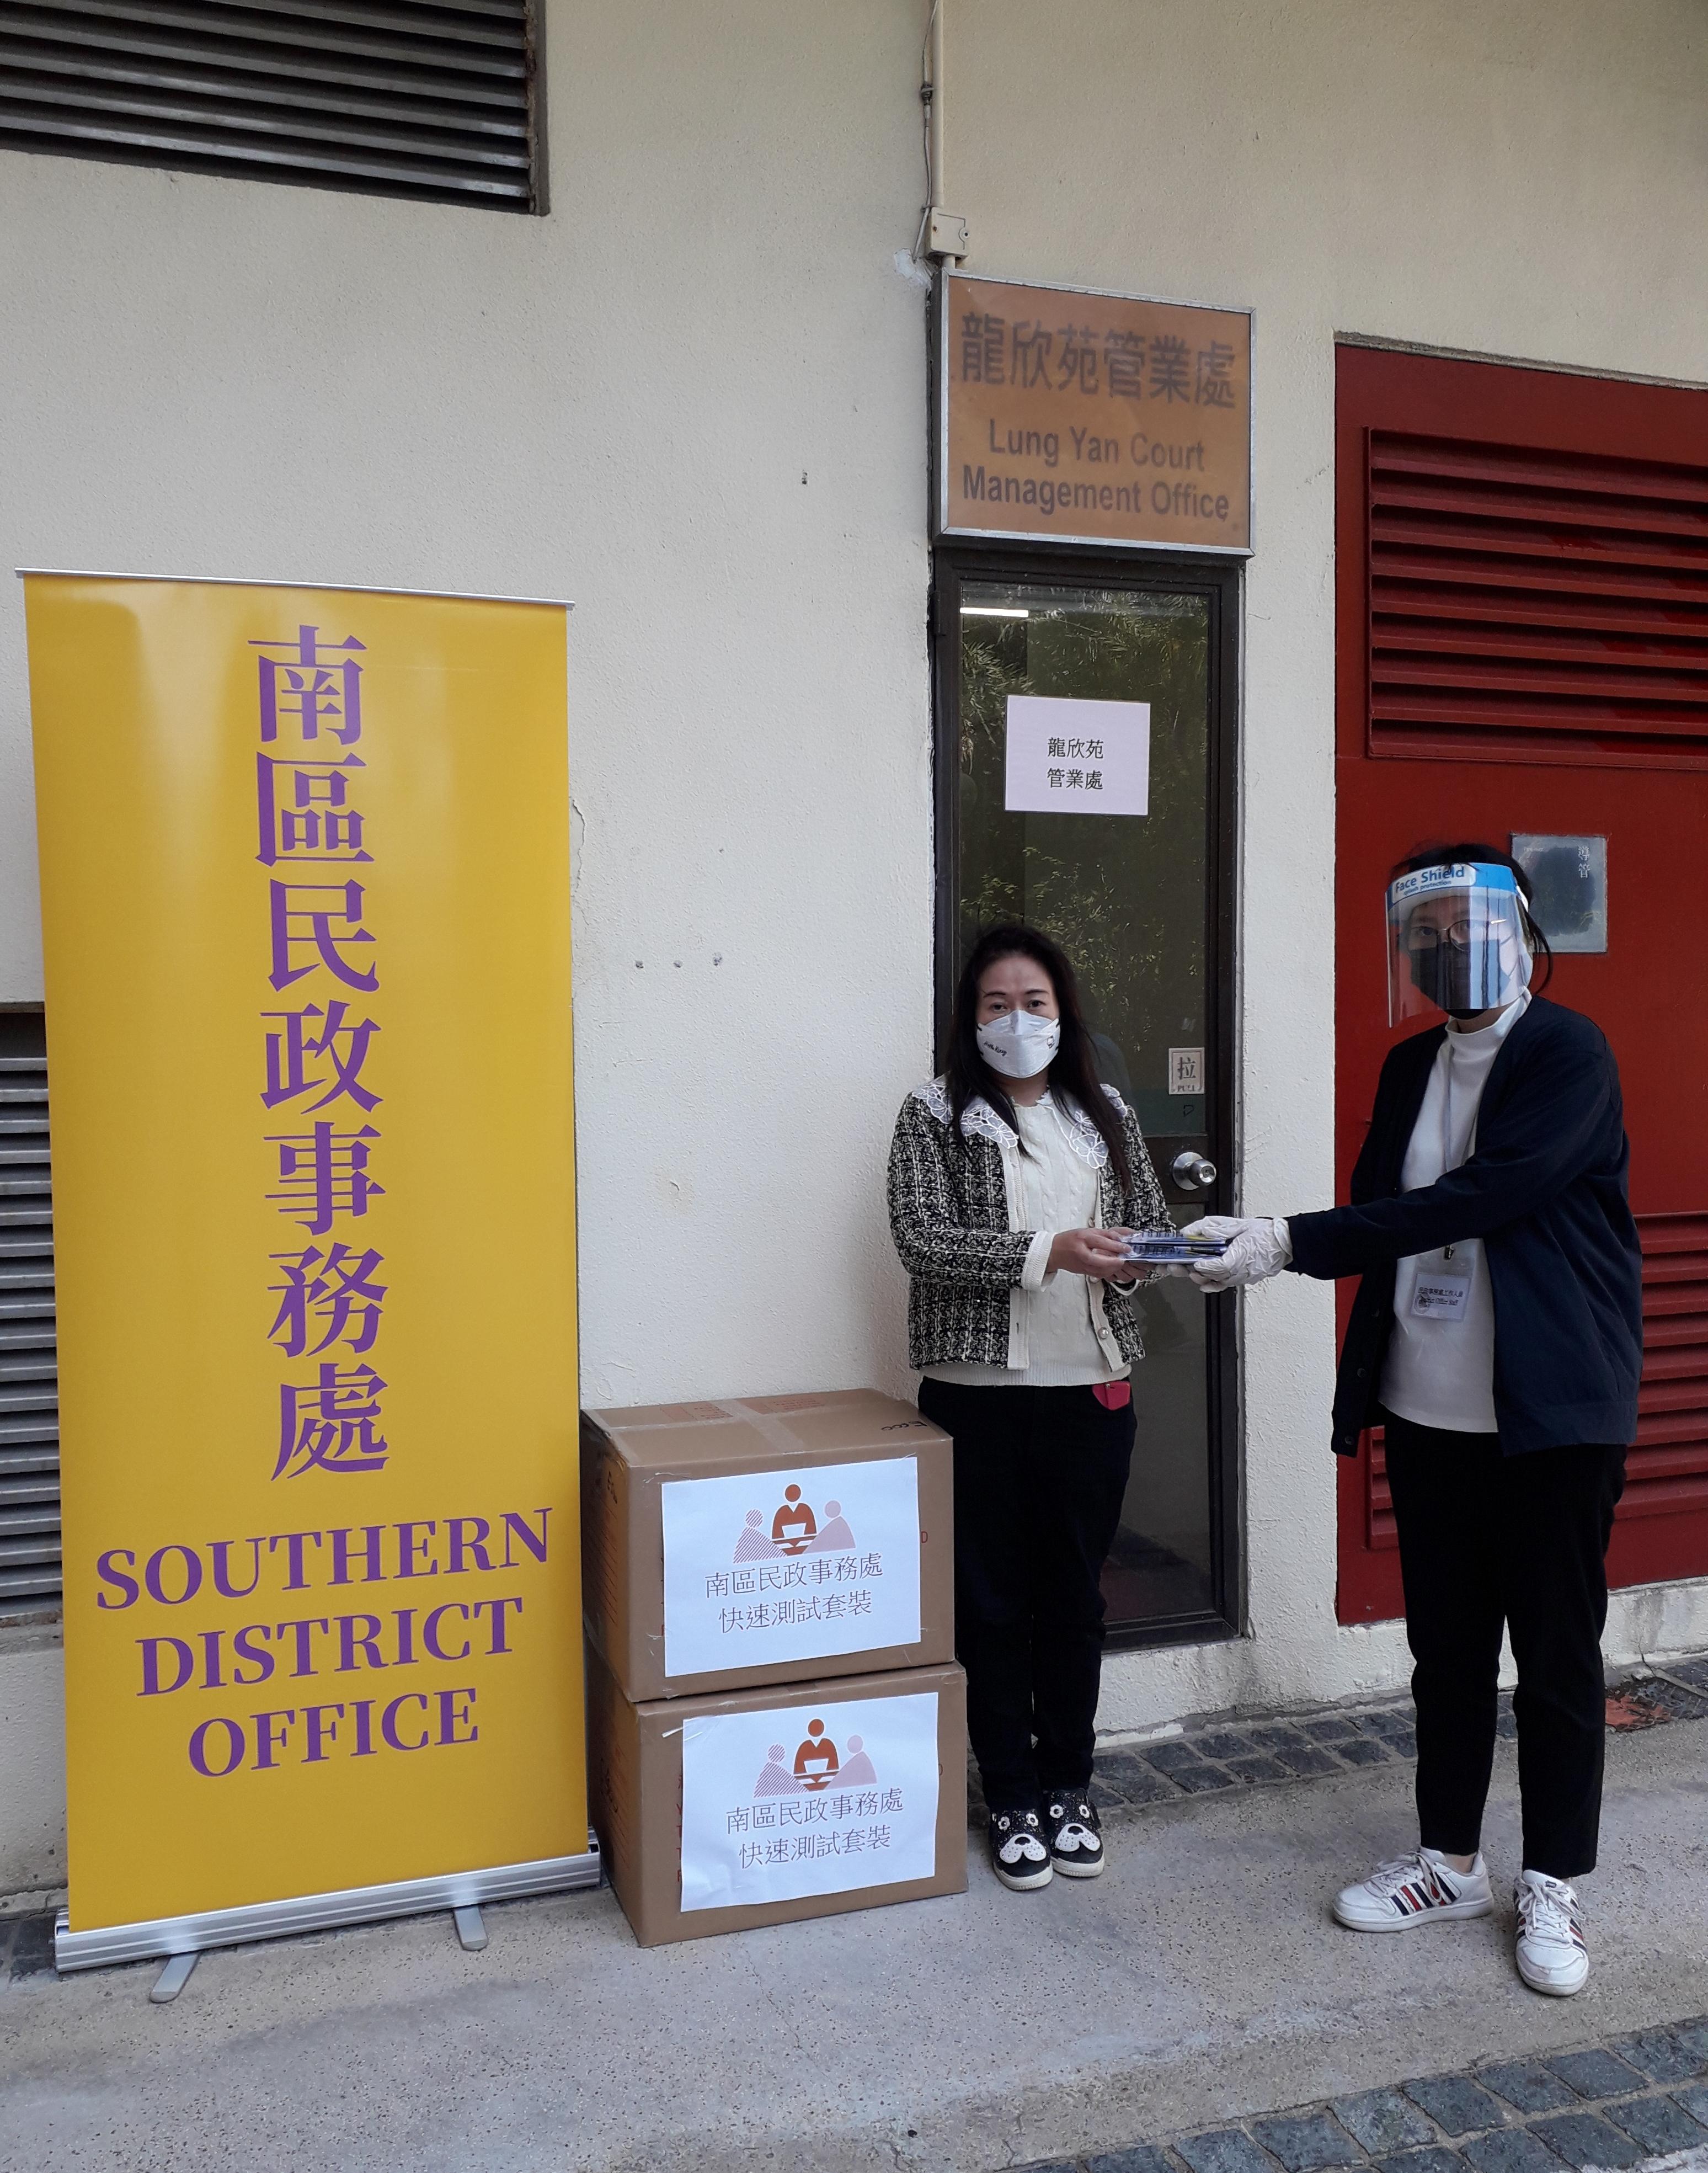 The Southern District Office today (March 10) distributed COVID-19 rapid test kits to households, cleansing workers and property management staff living and working in Lung Yan Court for voluntary testing through the property management company.